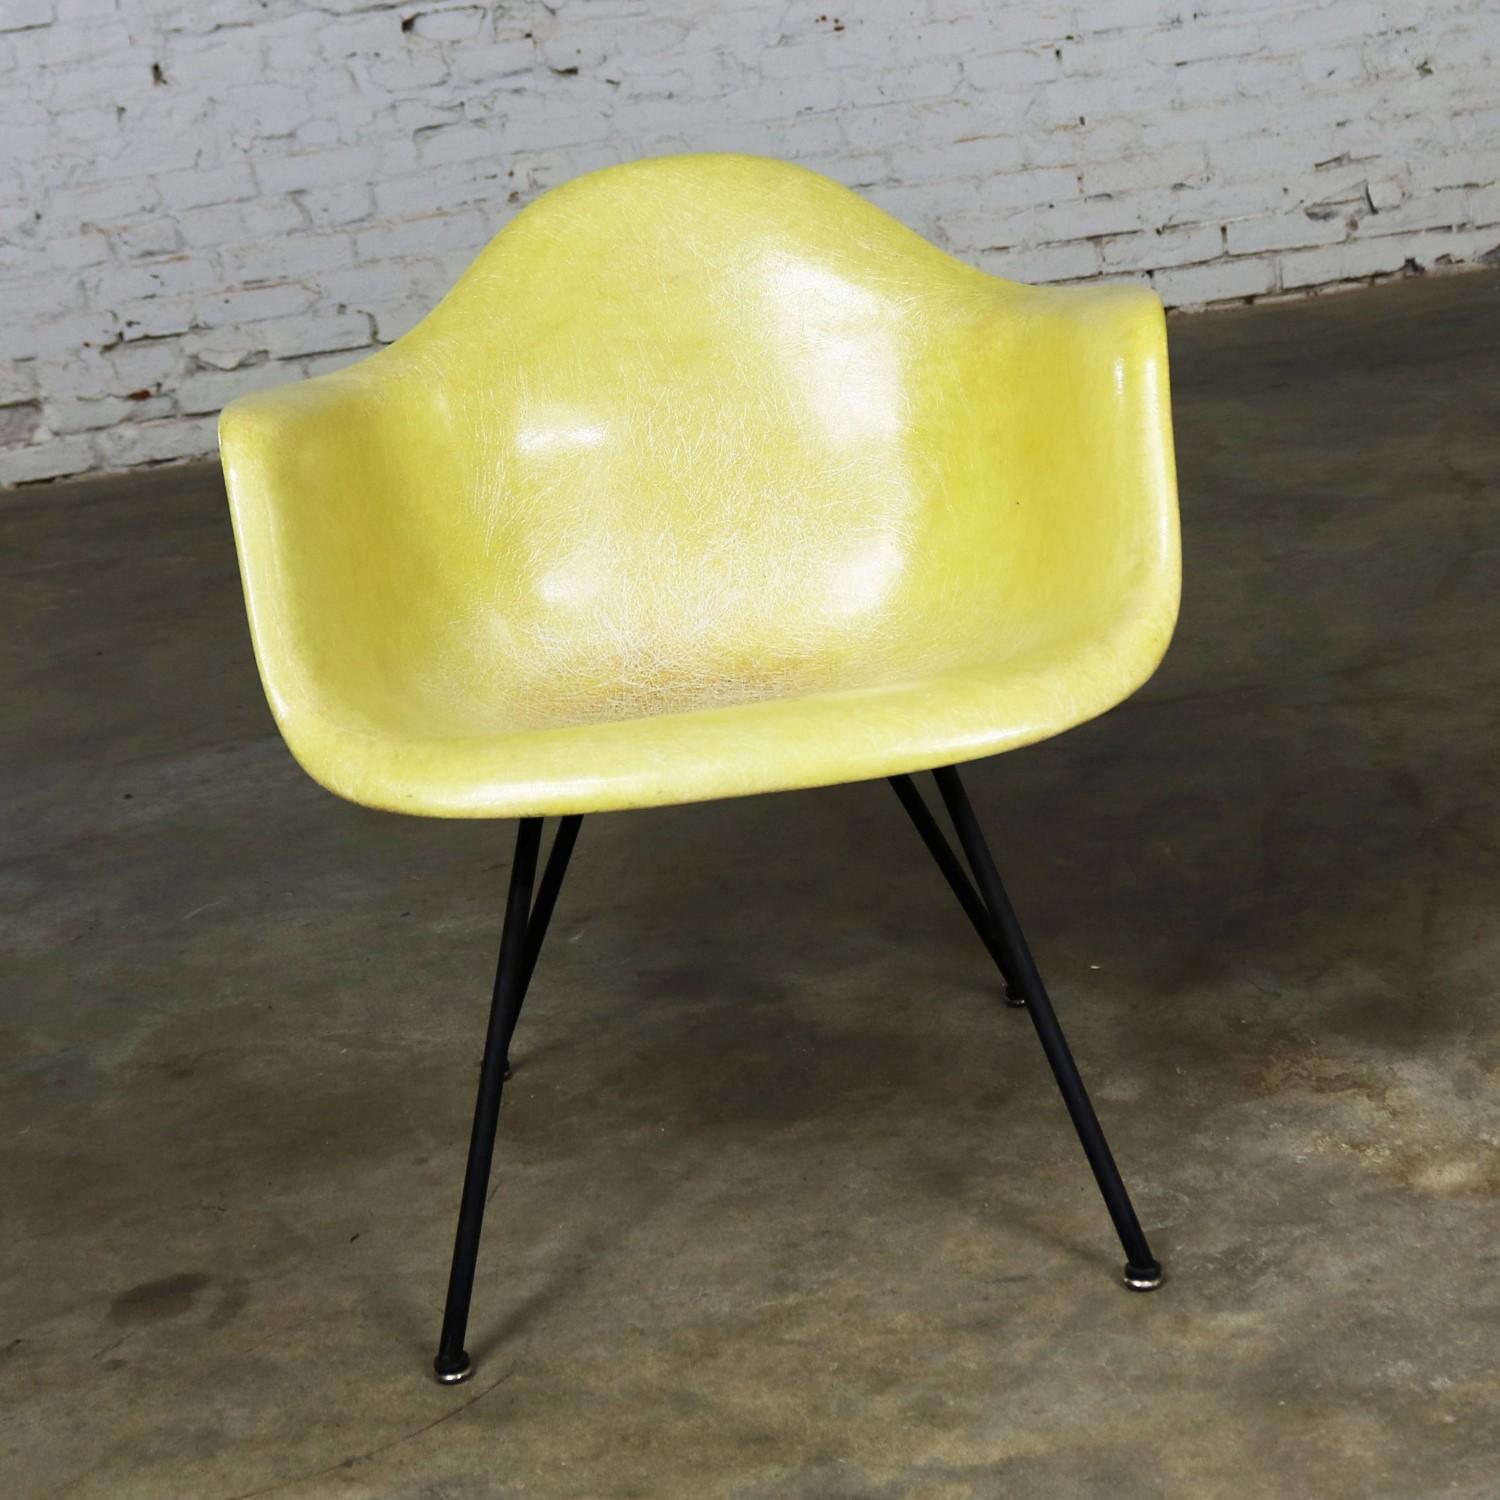 Awesome example of the Charles and Ray Eames LAX molded fiberglass arm shell chair for Herman Miller in one of the original colors, lemon yellow. This is an early chair made by Zenith with the rope edge, X-base, and checkerboard Zenith paper label.